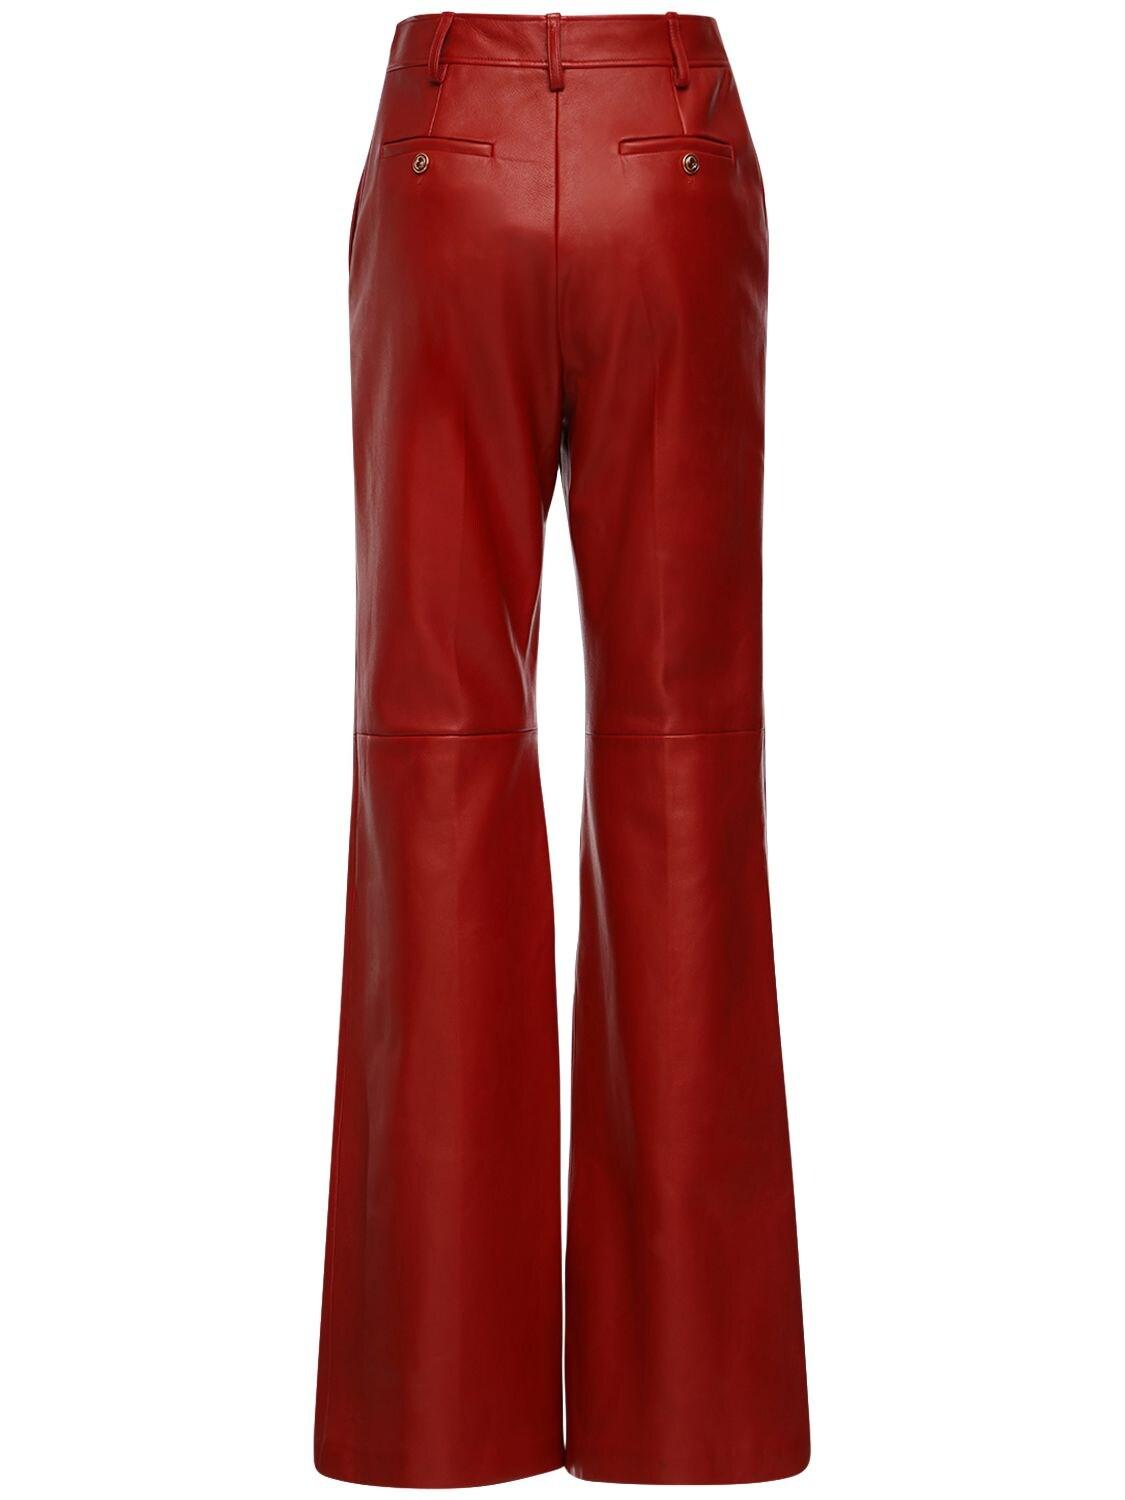 Gucci Plongé Leather Flare Trousers in Red